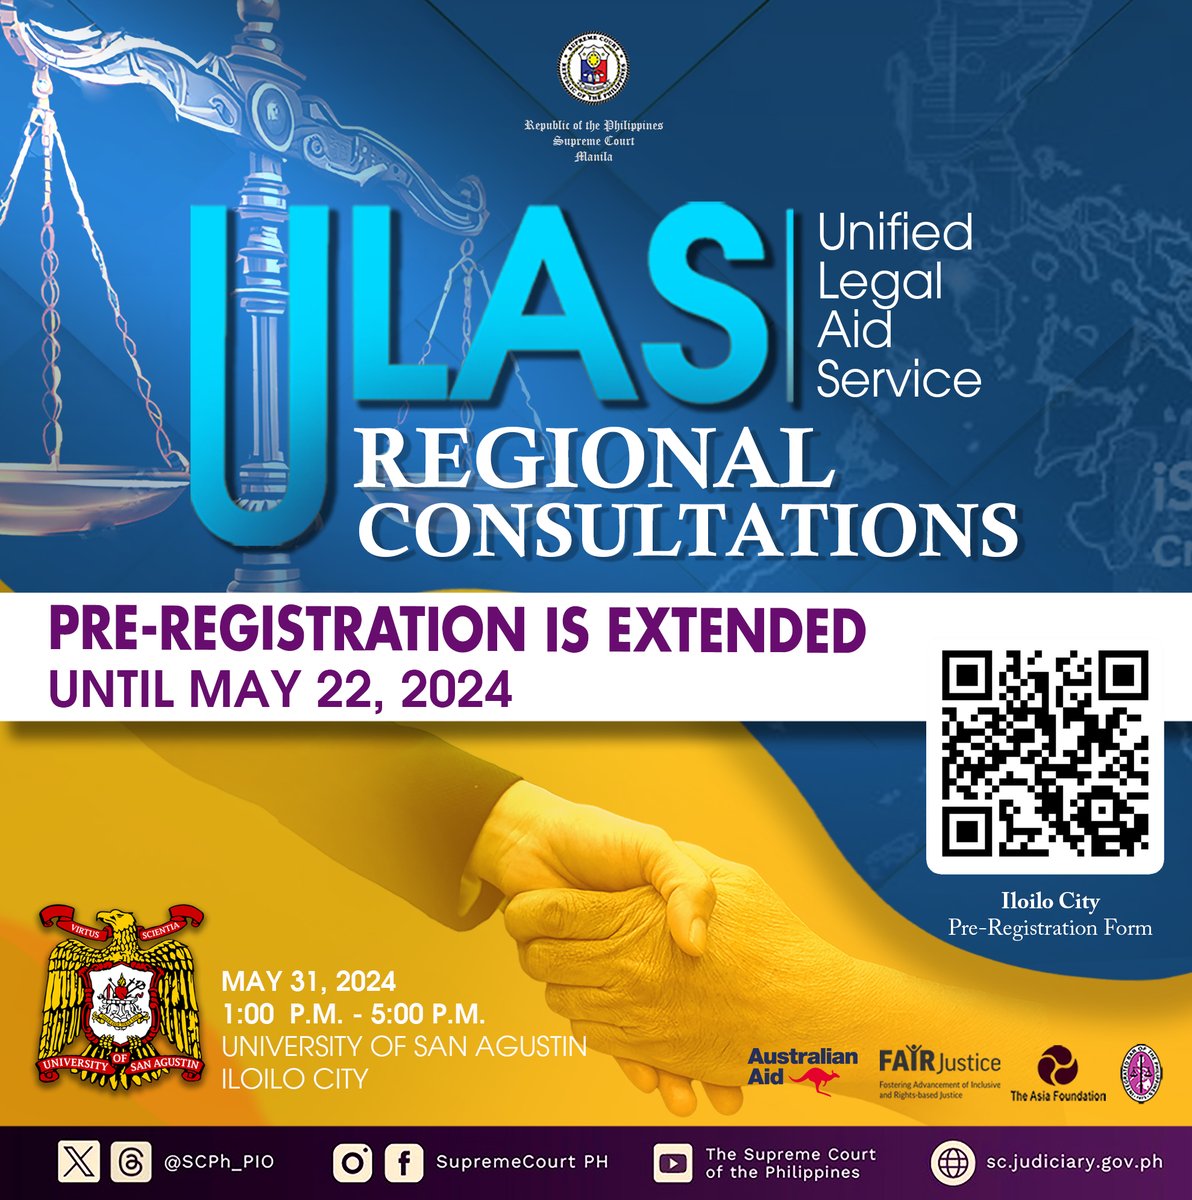 Pre-registration for the Unified Legal Aid Service (ULAS) Regional Consultations in ILOILO CITY is EXTENDED until May 22, 2024. Do not miss the chance to pre-register by scanning the QR code or clicking the following link: forms.office.com/r/DZLE5T2m7p. #ULASRegionalConsultations